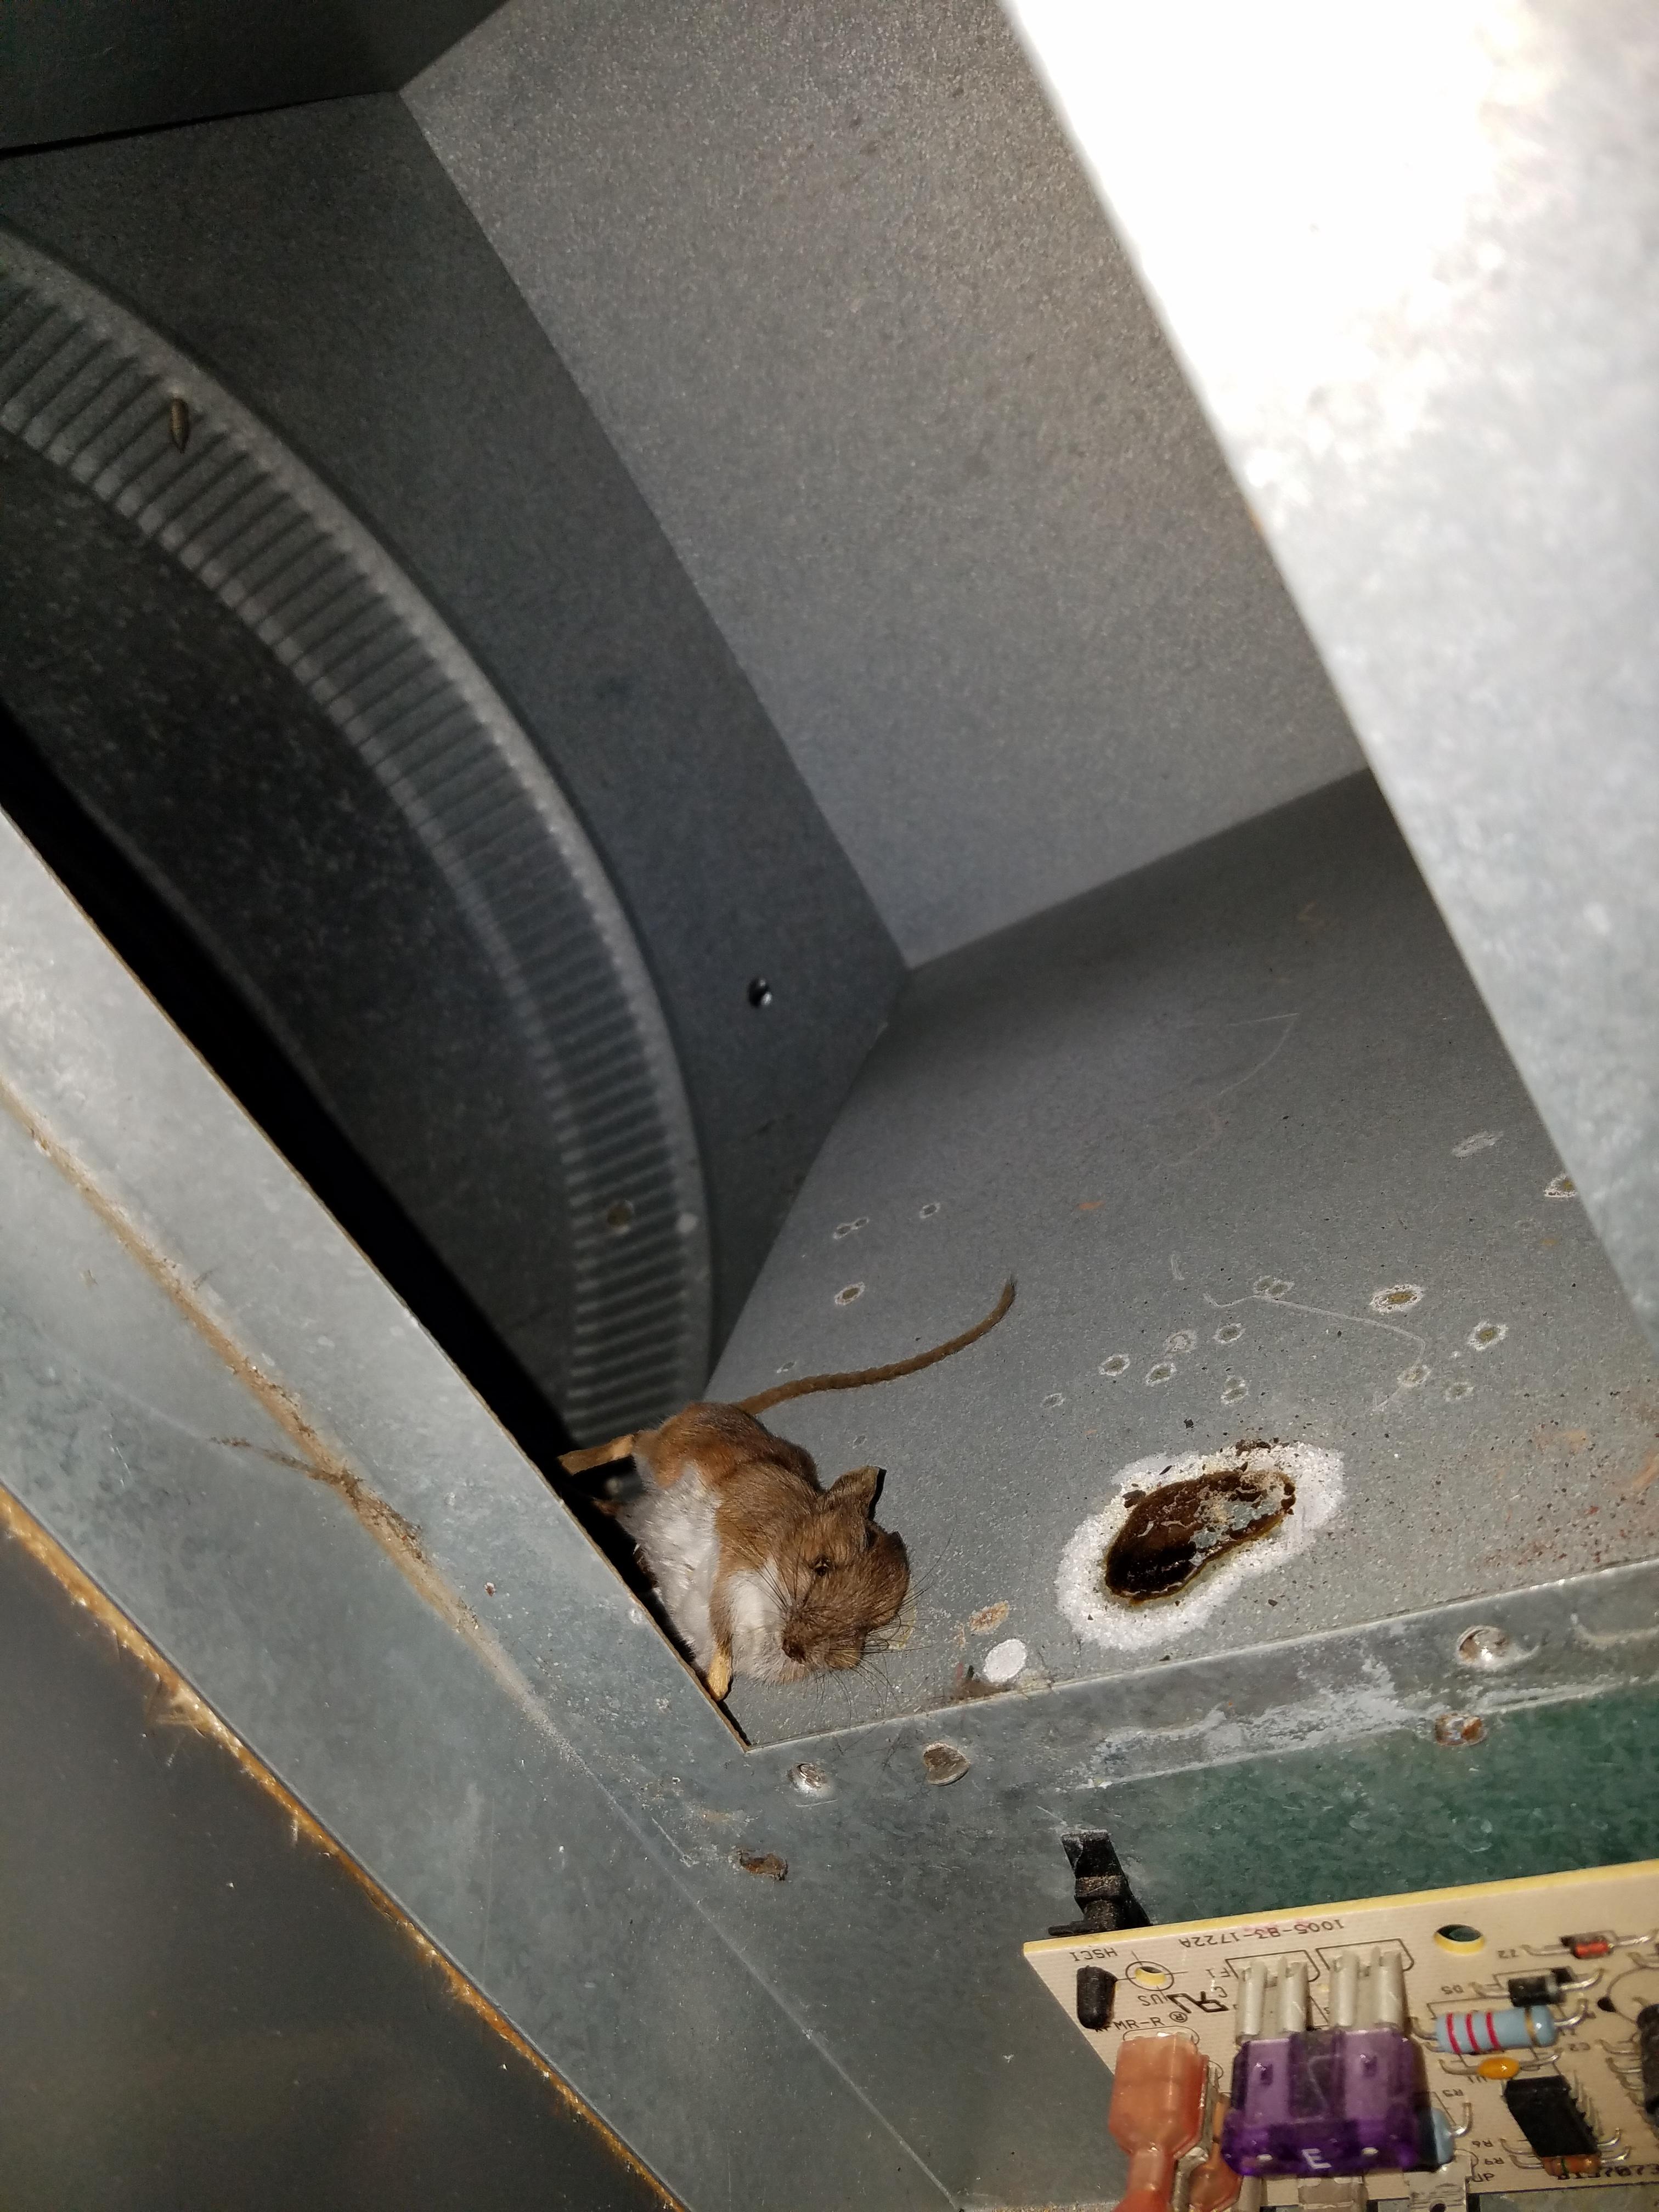 Dead mouse after in touched the live electric heat kit.